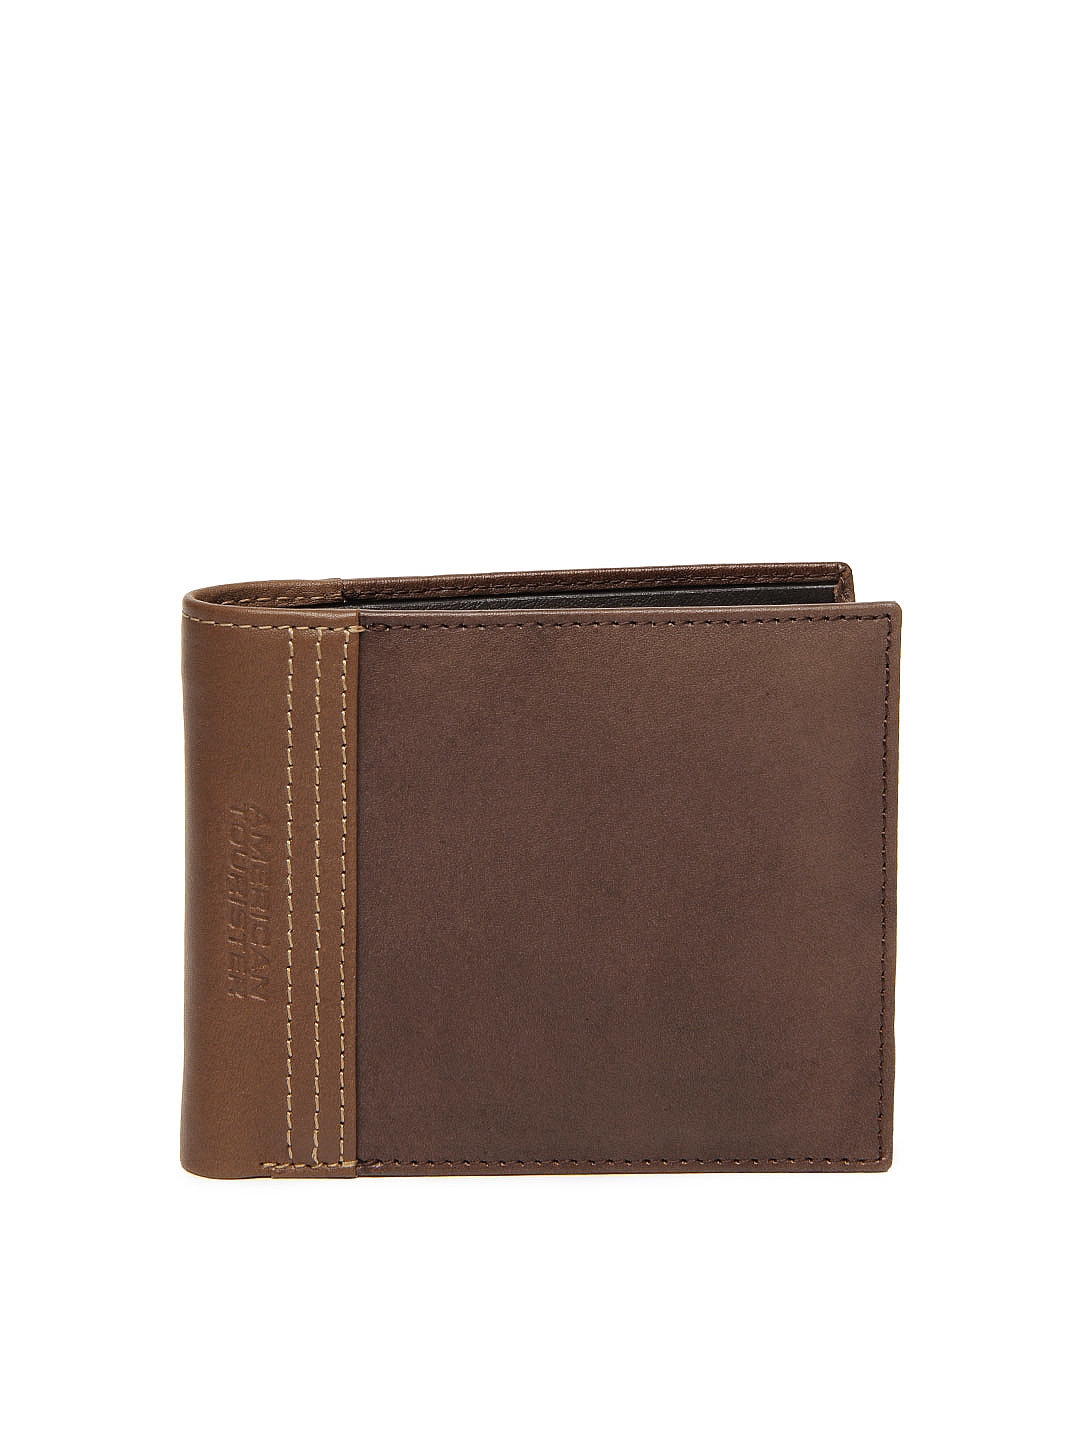 Buy American Tourister Men Brown Leather Wallet - Wallets for Men ...